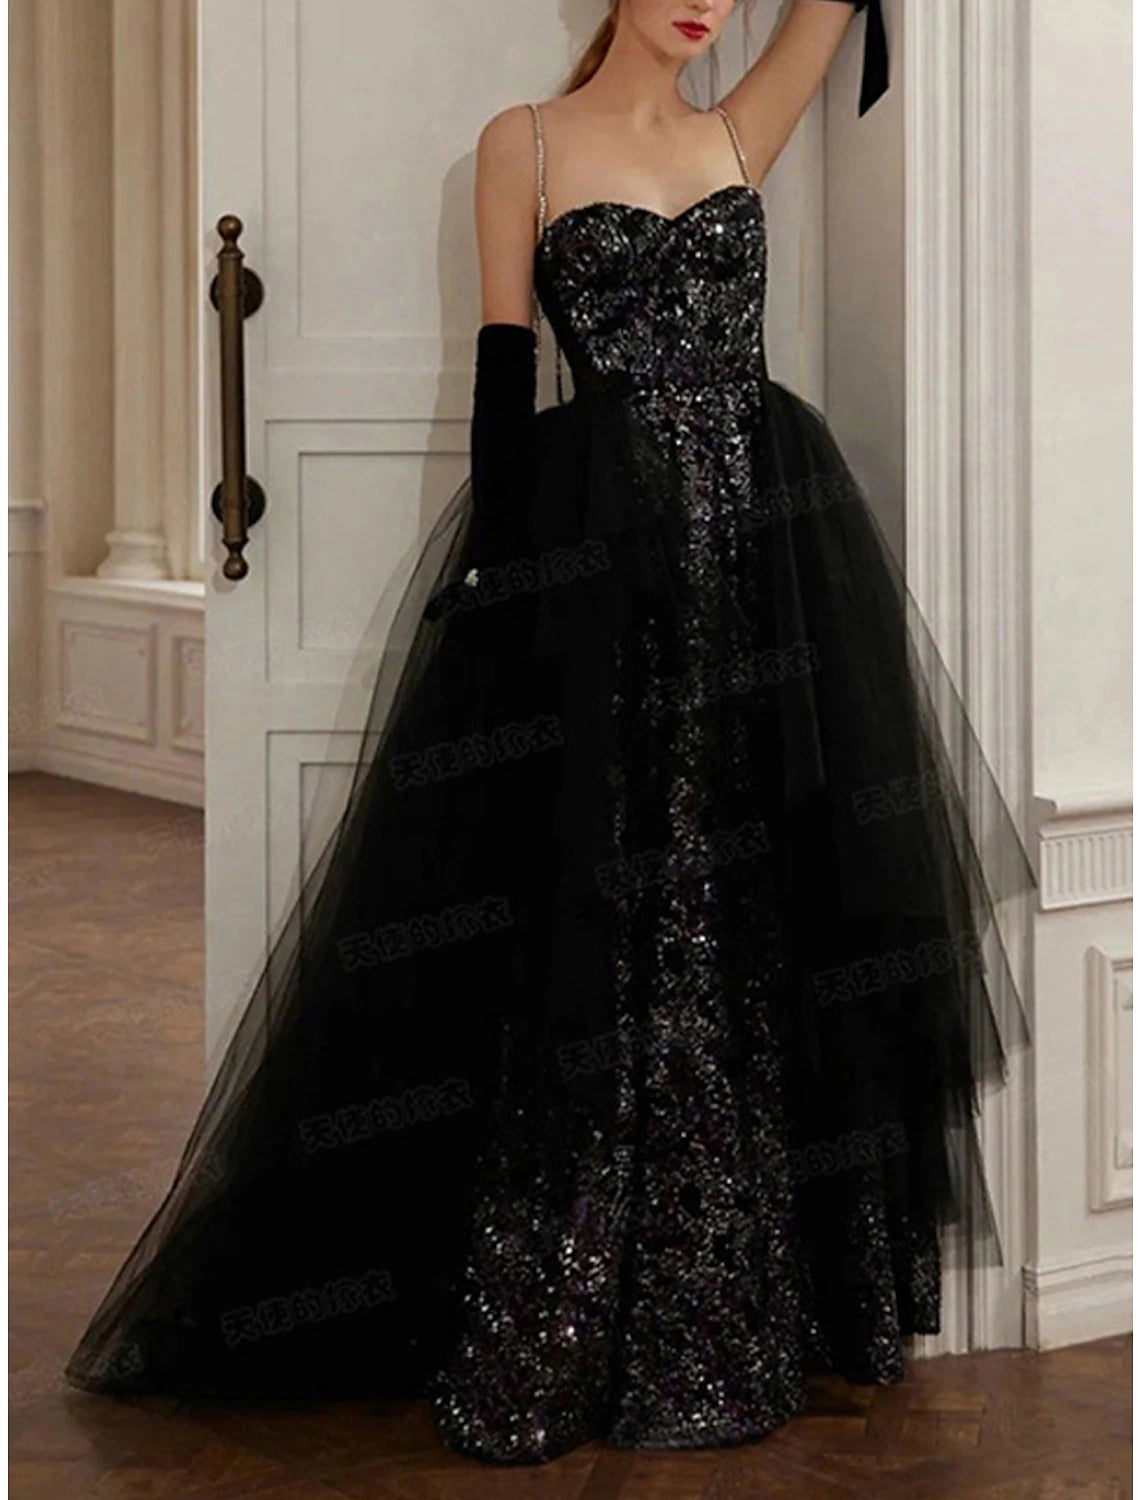 A-Line Evening Gown Black Dress Sparkle & Shine Dress Prom photoshoot Floor Length Sleeveless Strapless Sequined with Sequin